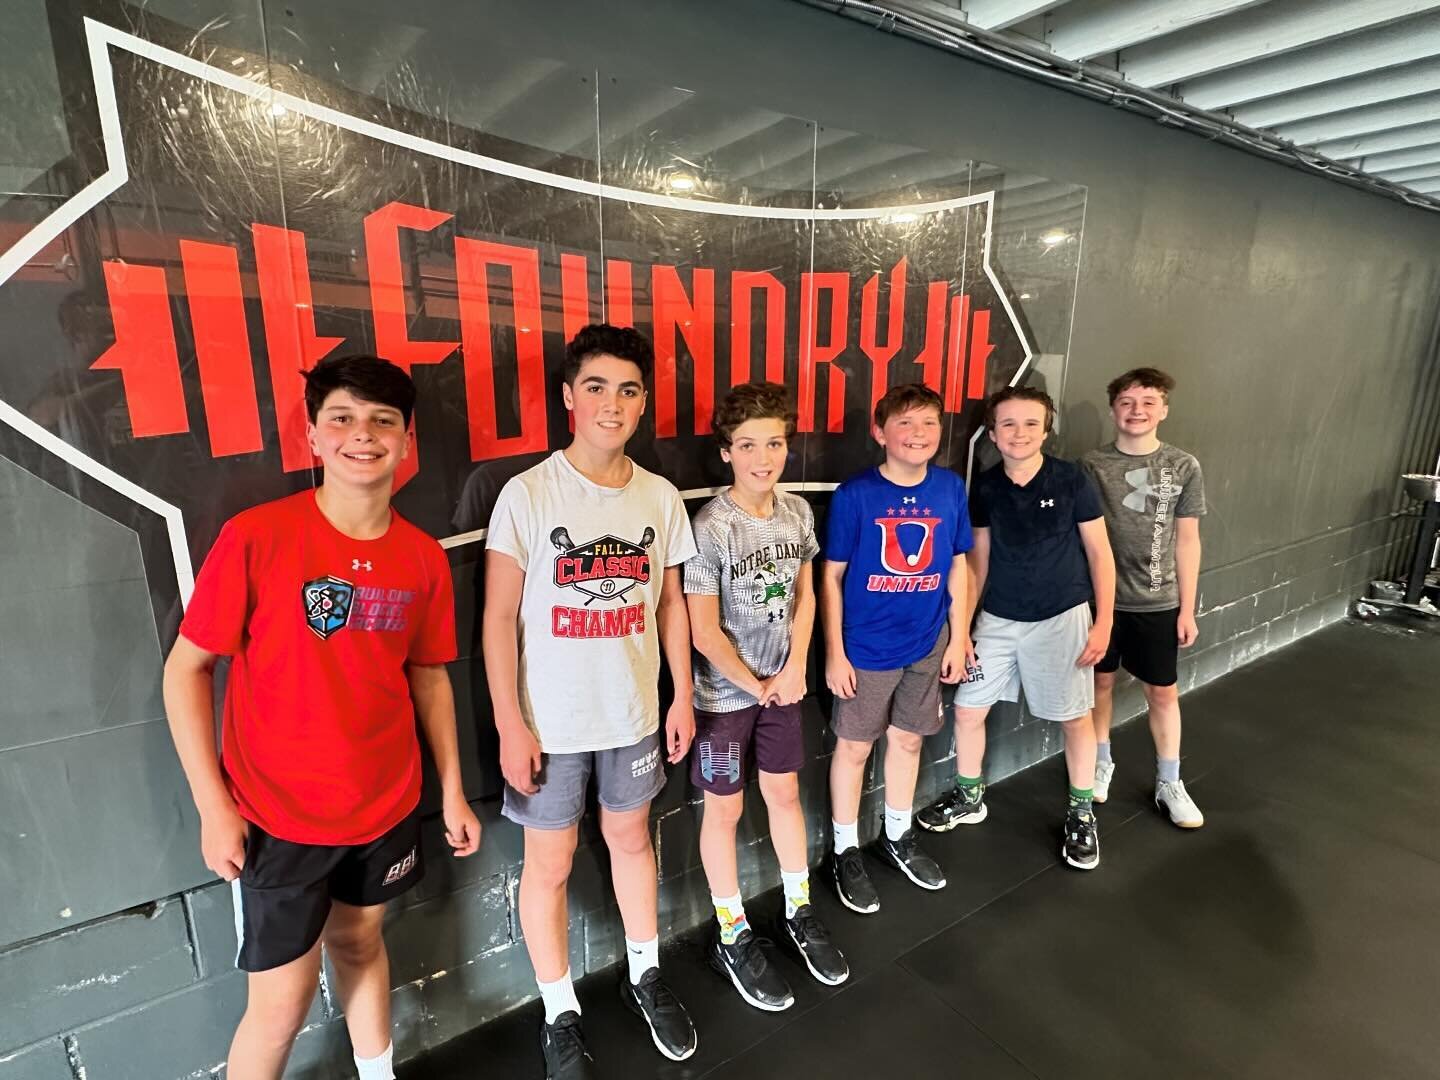 Foundry Teens starts today! Classes will be held on Tuesdays and Thursdays at 3:30pm. We will be covering a variety of functional movements that are designed to improve strength, endurance, flexibility, and overall fitness. 

Some common movements in